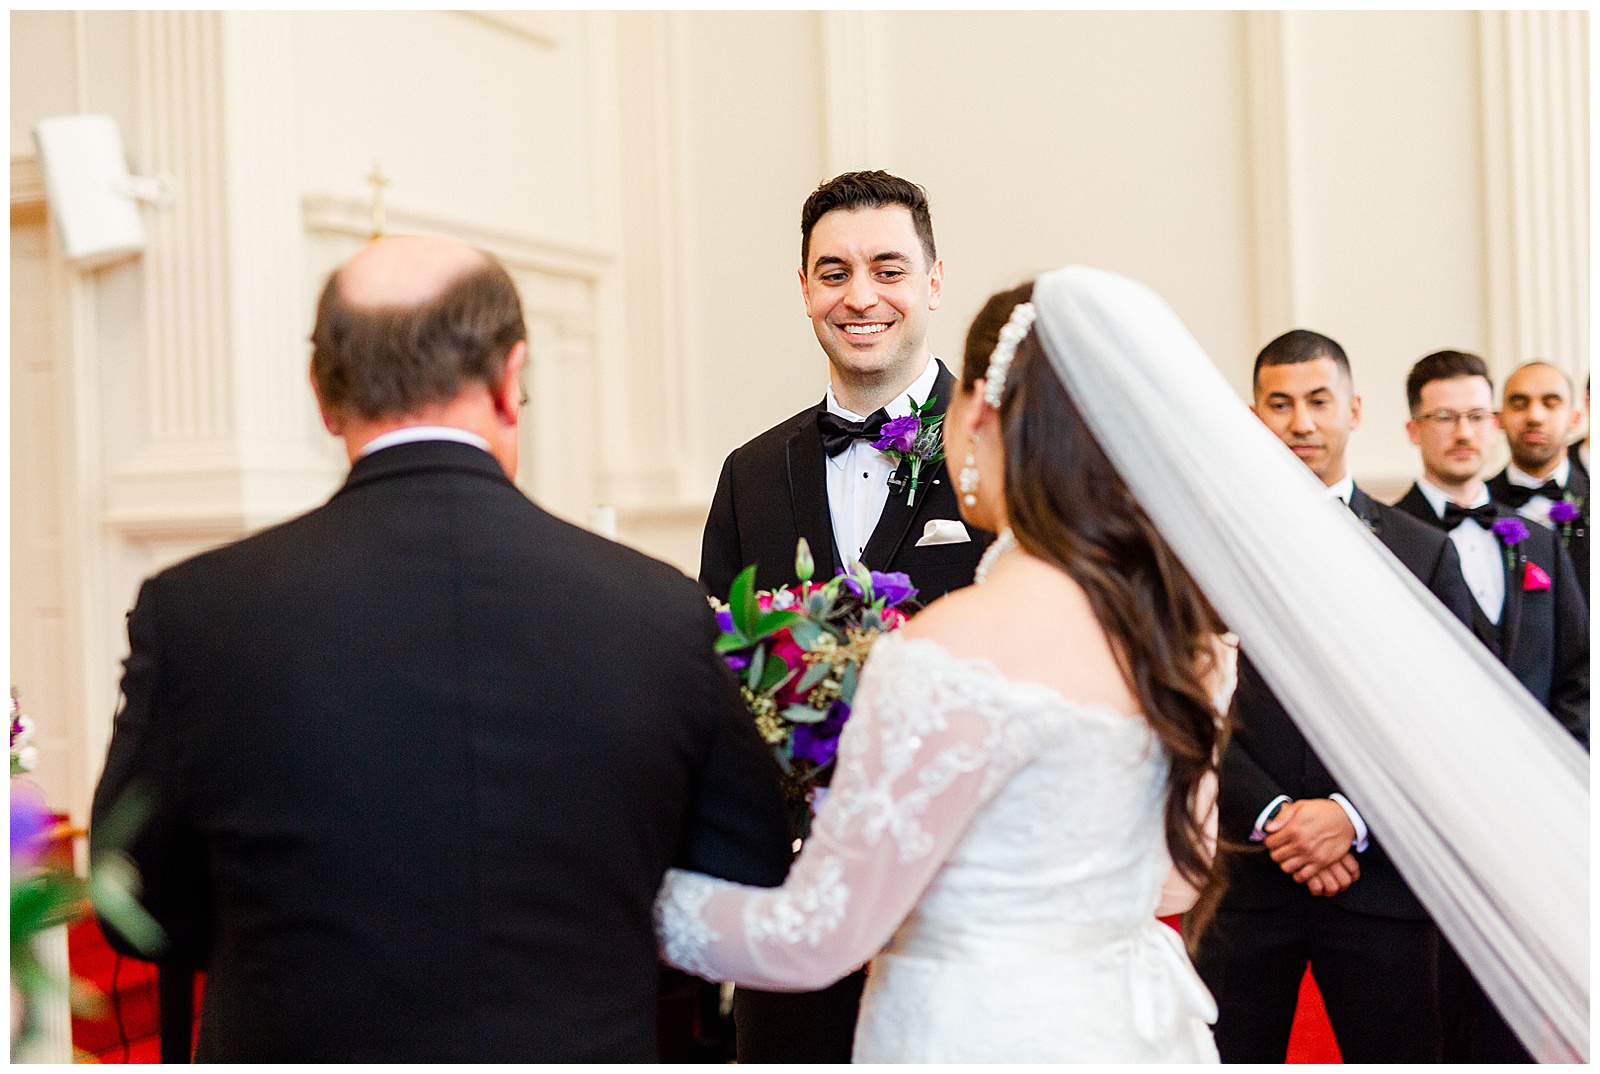 💍 emotional dad father of bride walks daughter down the aisle and groom sees bride for first time first look at wedding ceremony in indoor church 💍 Bright Colorful Summer City Wedding in Charlotte, NC with Taryn and Ryan | Kevyn Dixon Photography